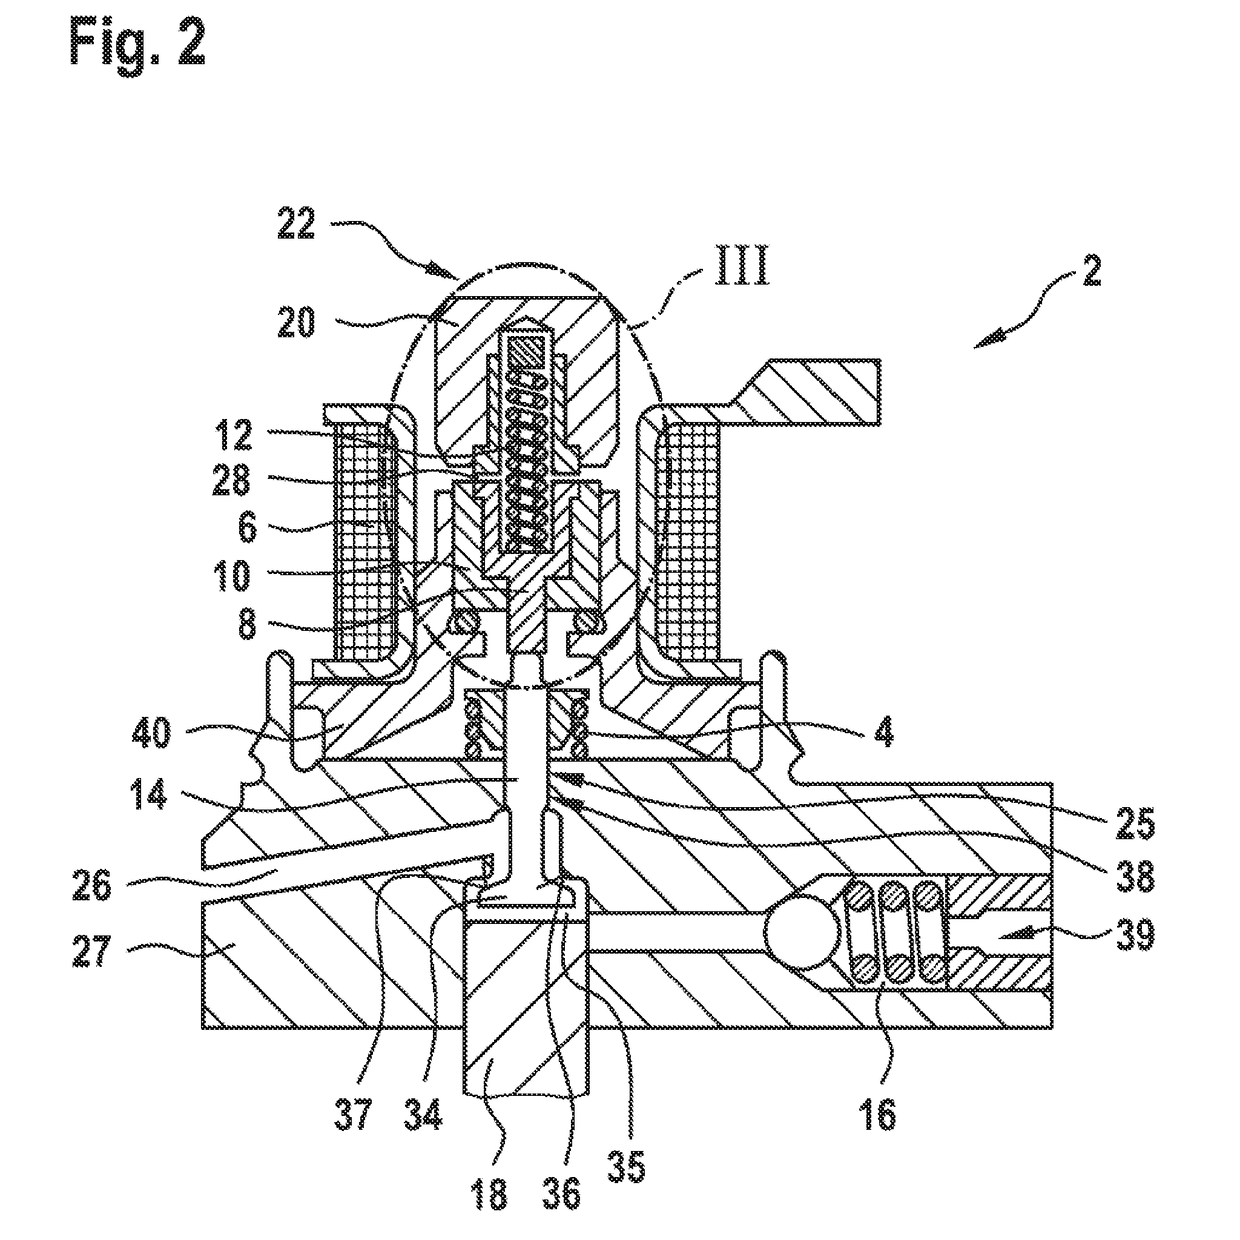 Valve, In Particular A Suction Valve, In A High-Pressure Pump of A Fuel Injection System